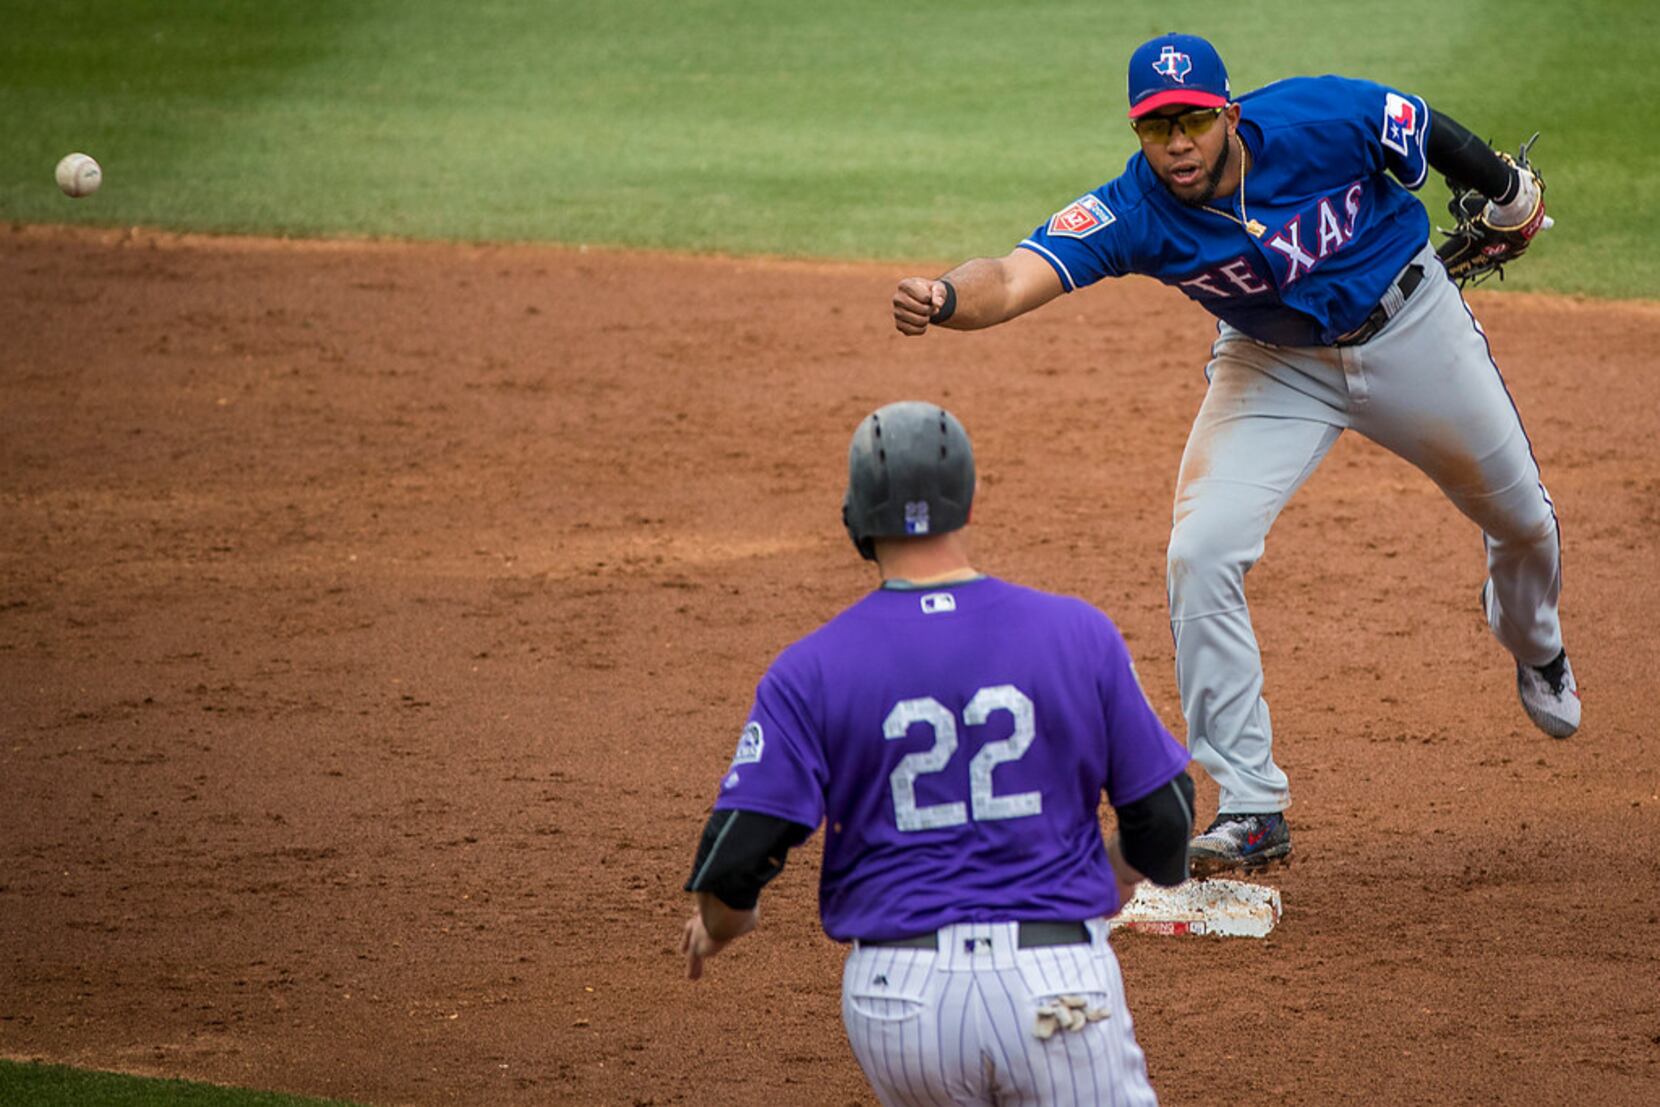 Elvis Andrus says goodbye to Dallas: You will always hold a special